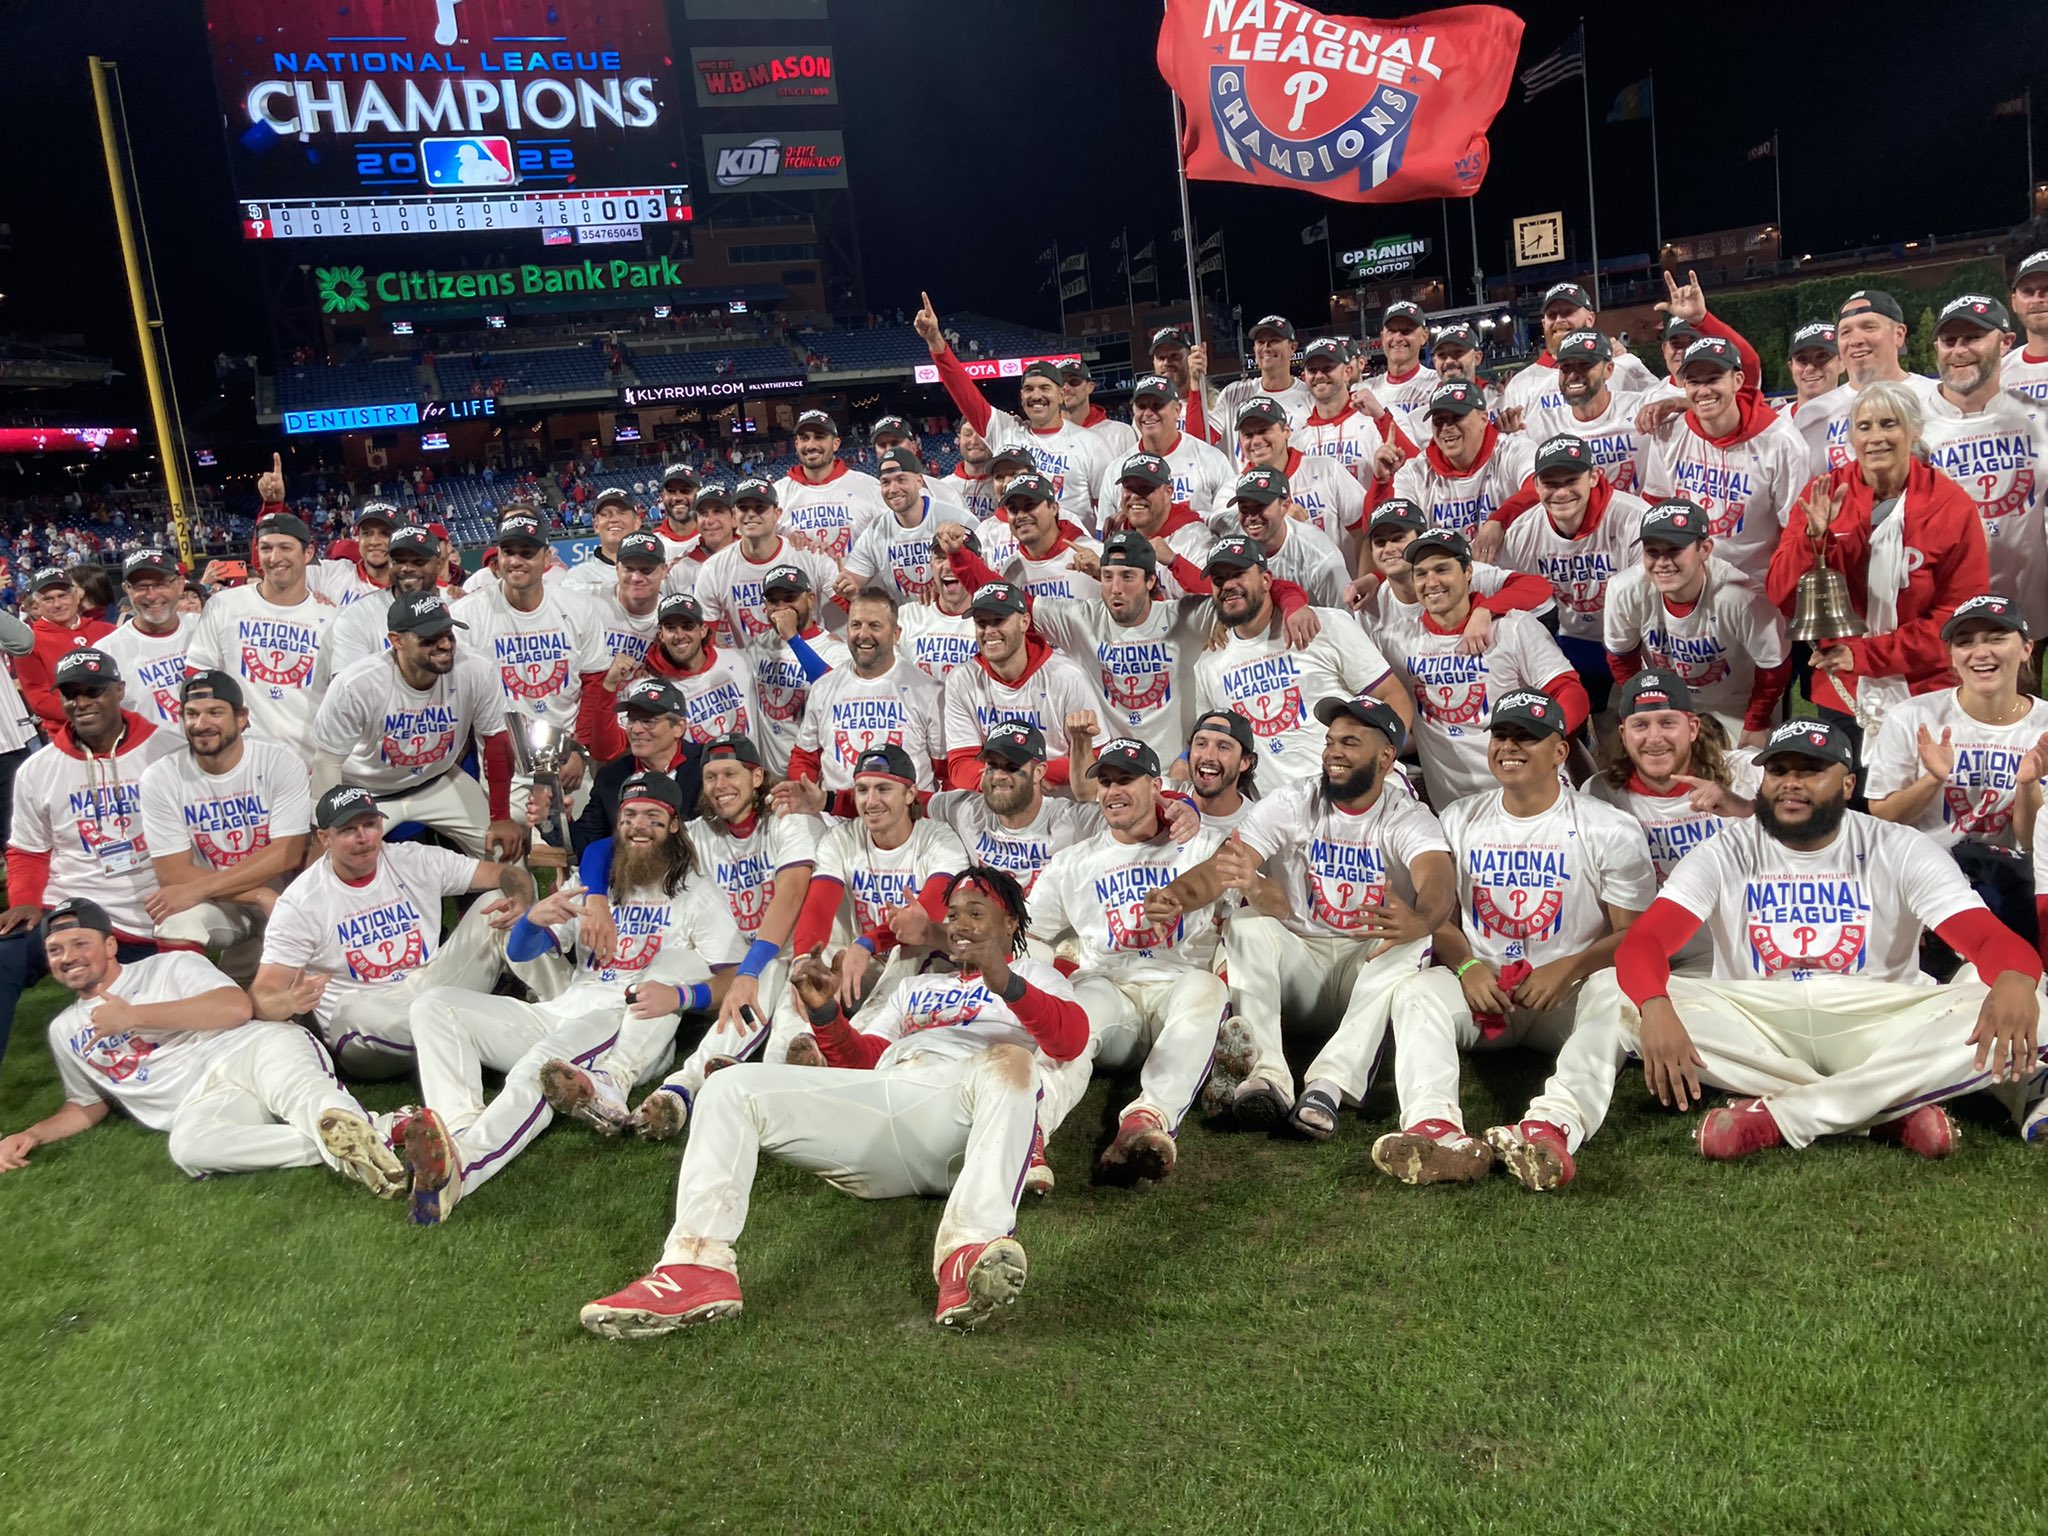 phillies win the pennant